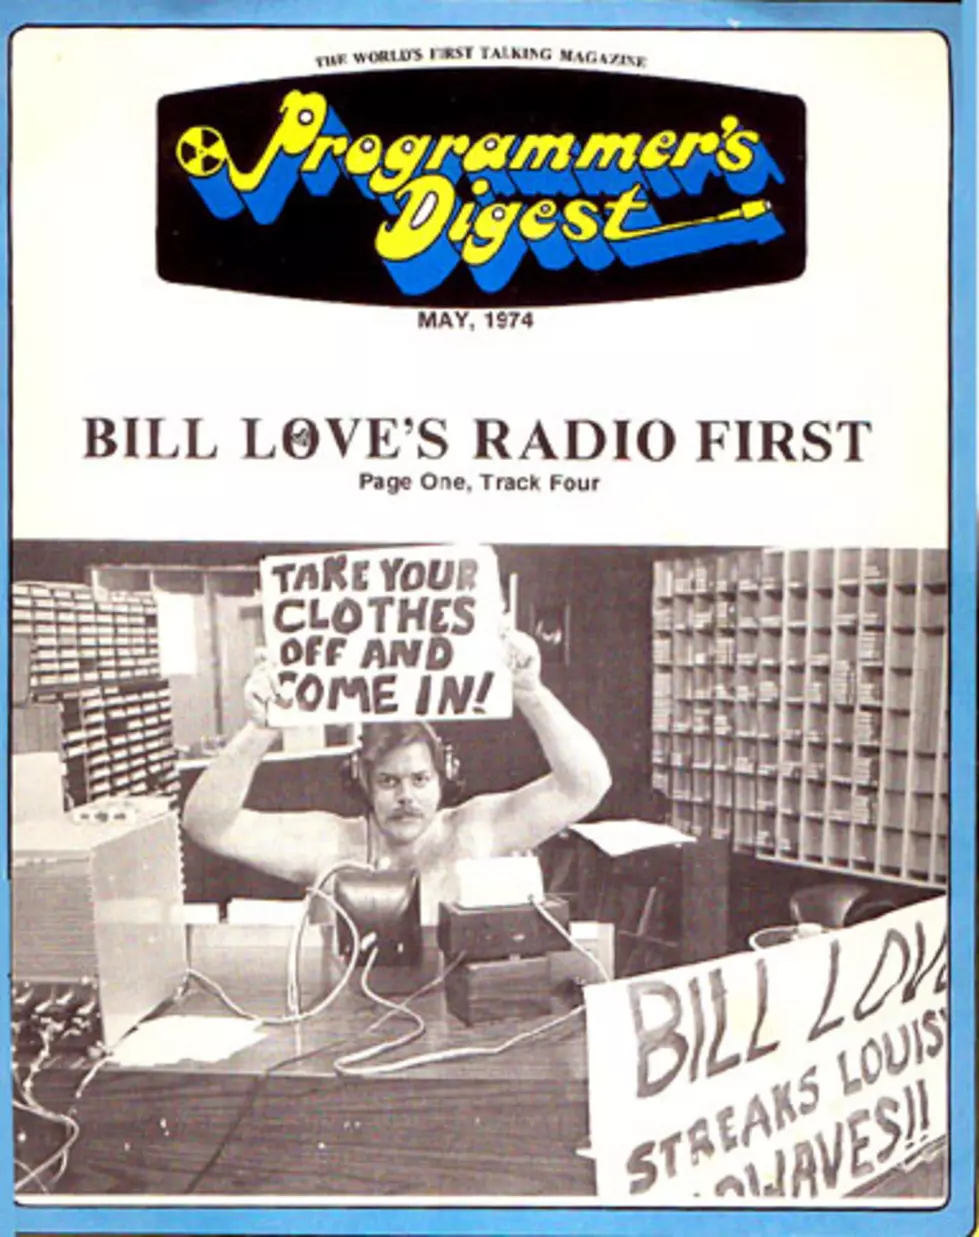 45 Years Ago Our Own Big Bill Love Was First DJ to Streak